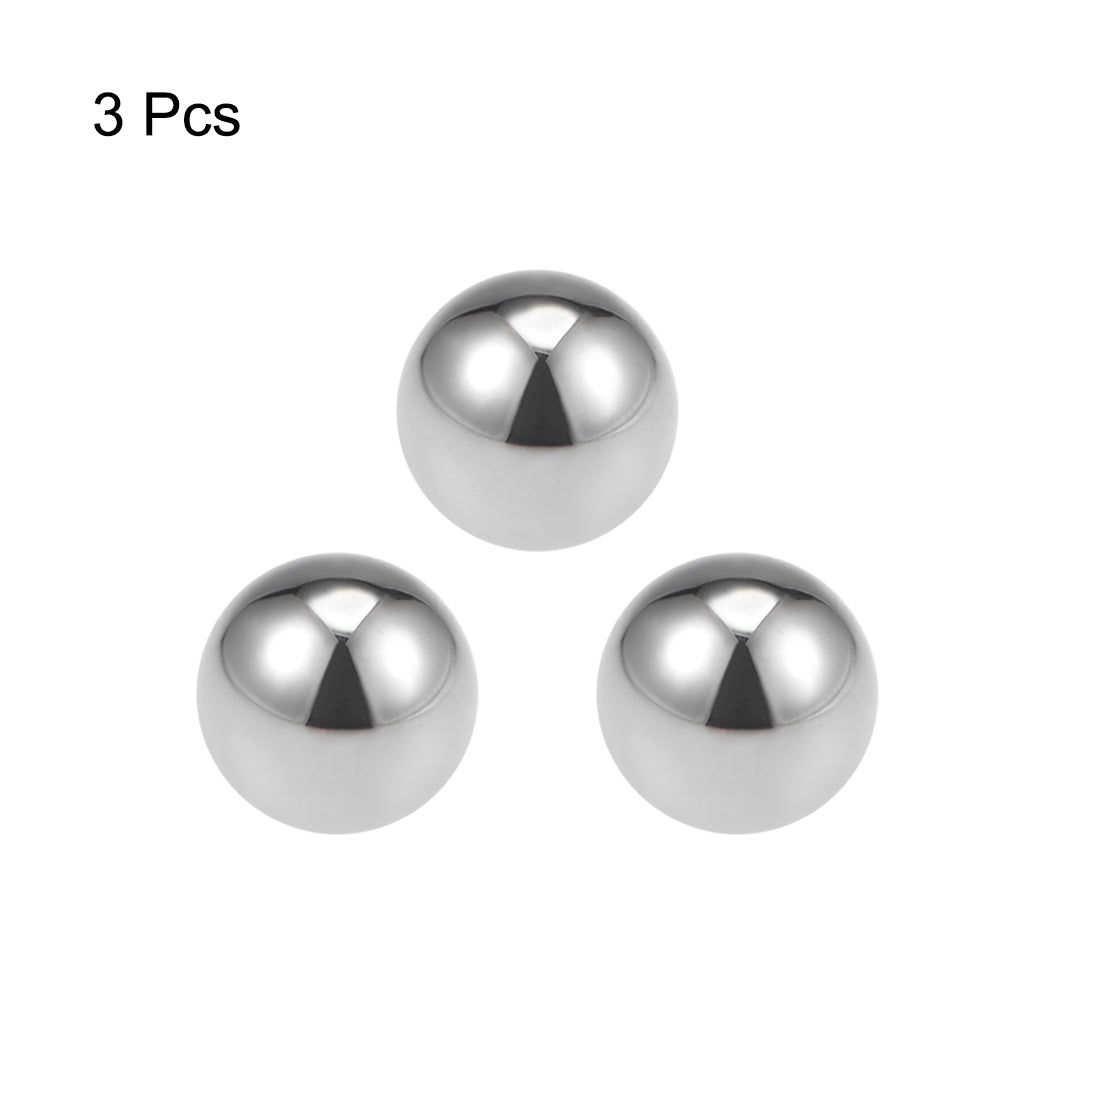 uxcell Uxcell Precision Balls 1" Solid Chrome Steel G25 for Ball Bearing Wheel 3pcs